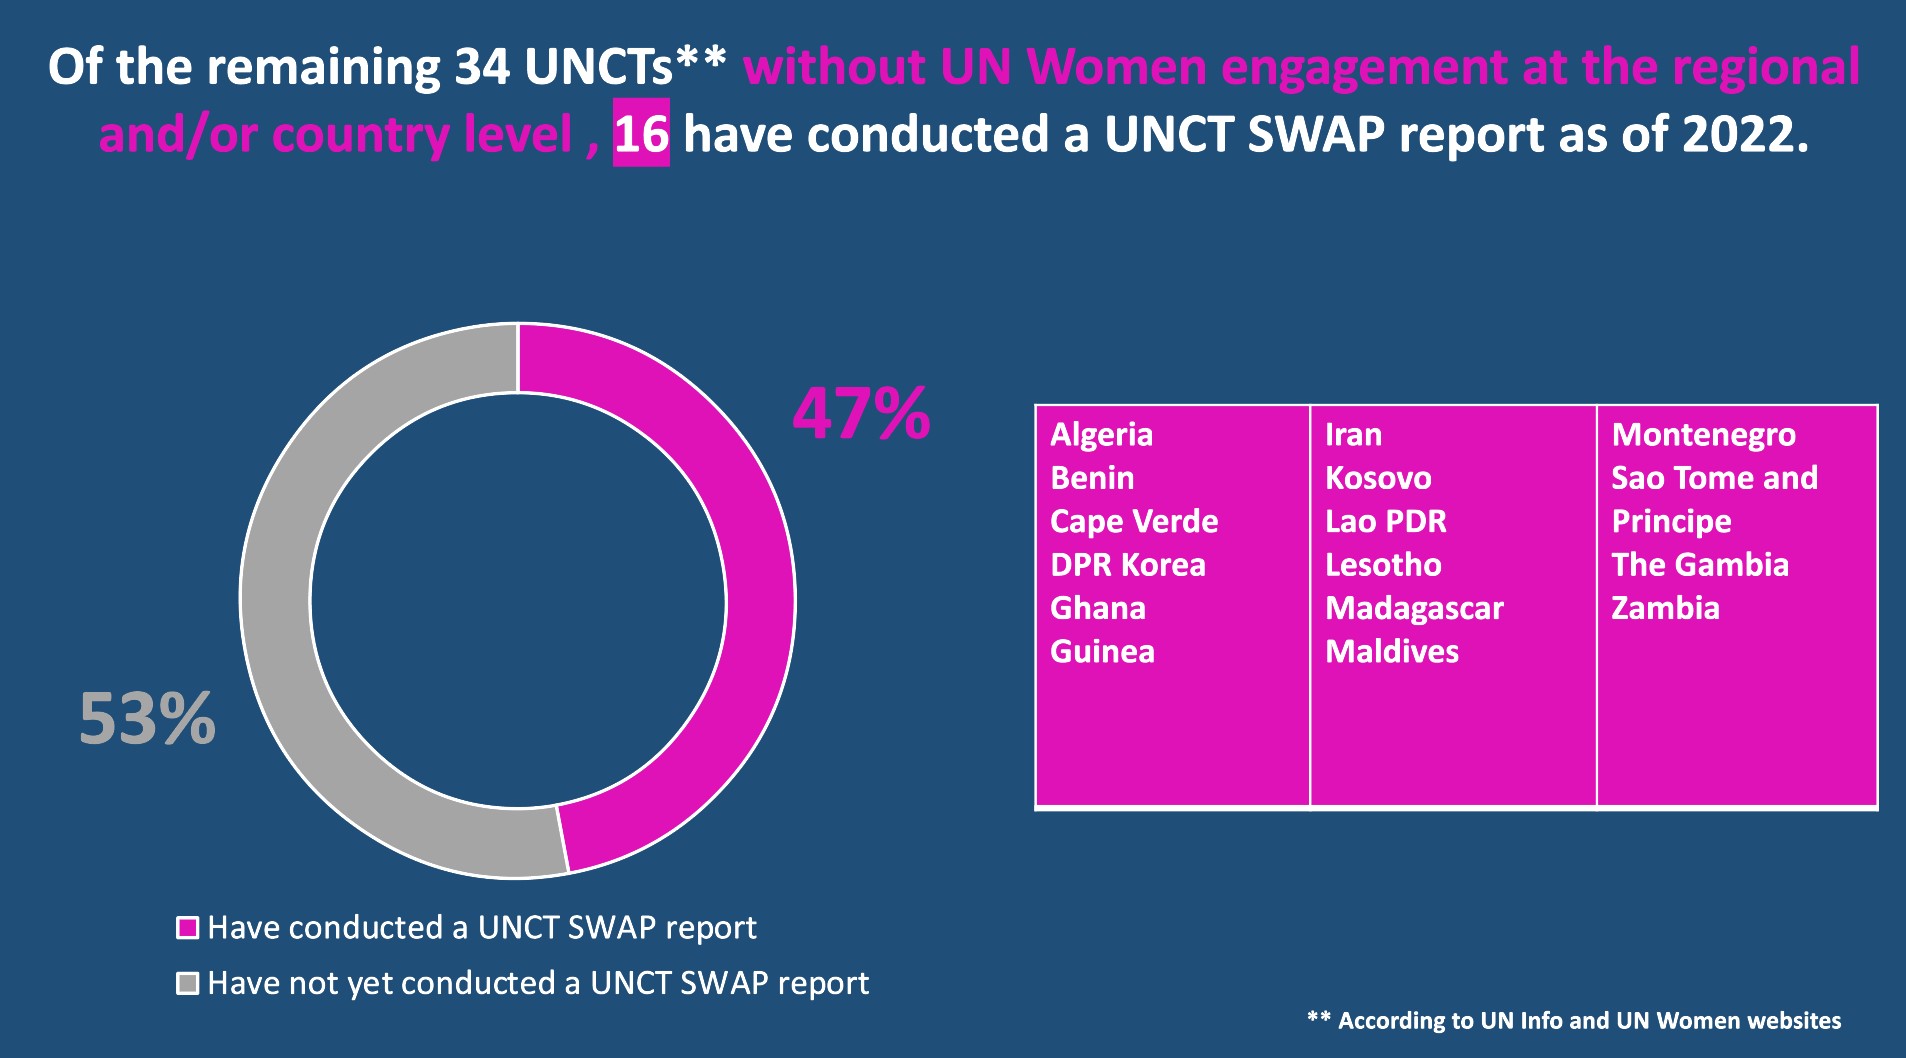  2022 UNCT SWAP Implementation Coverage of UNCTs without UN Women engagement